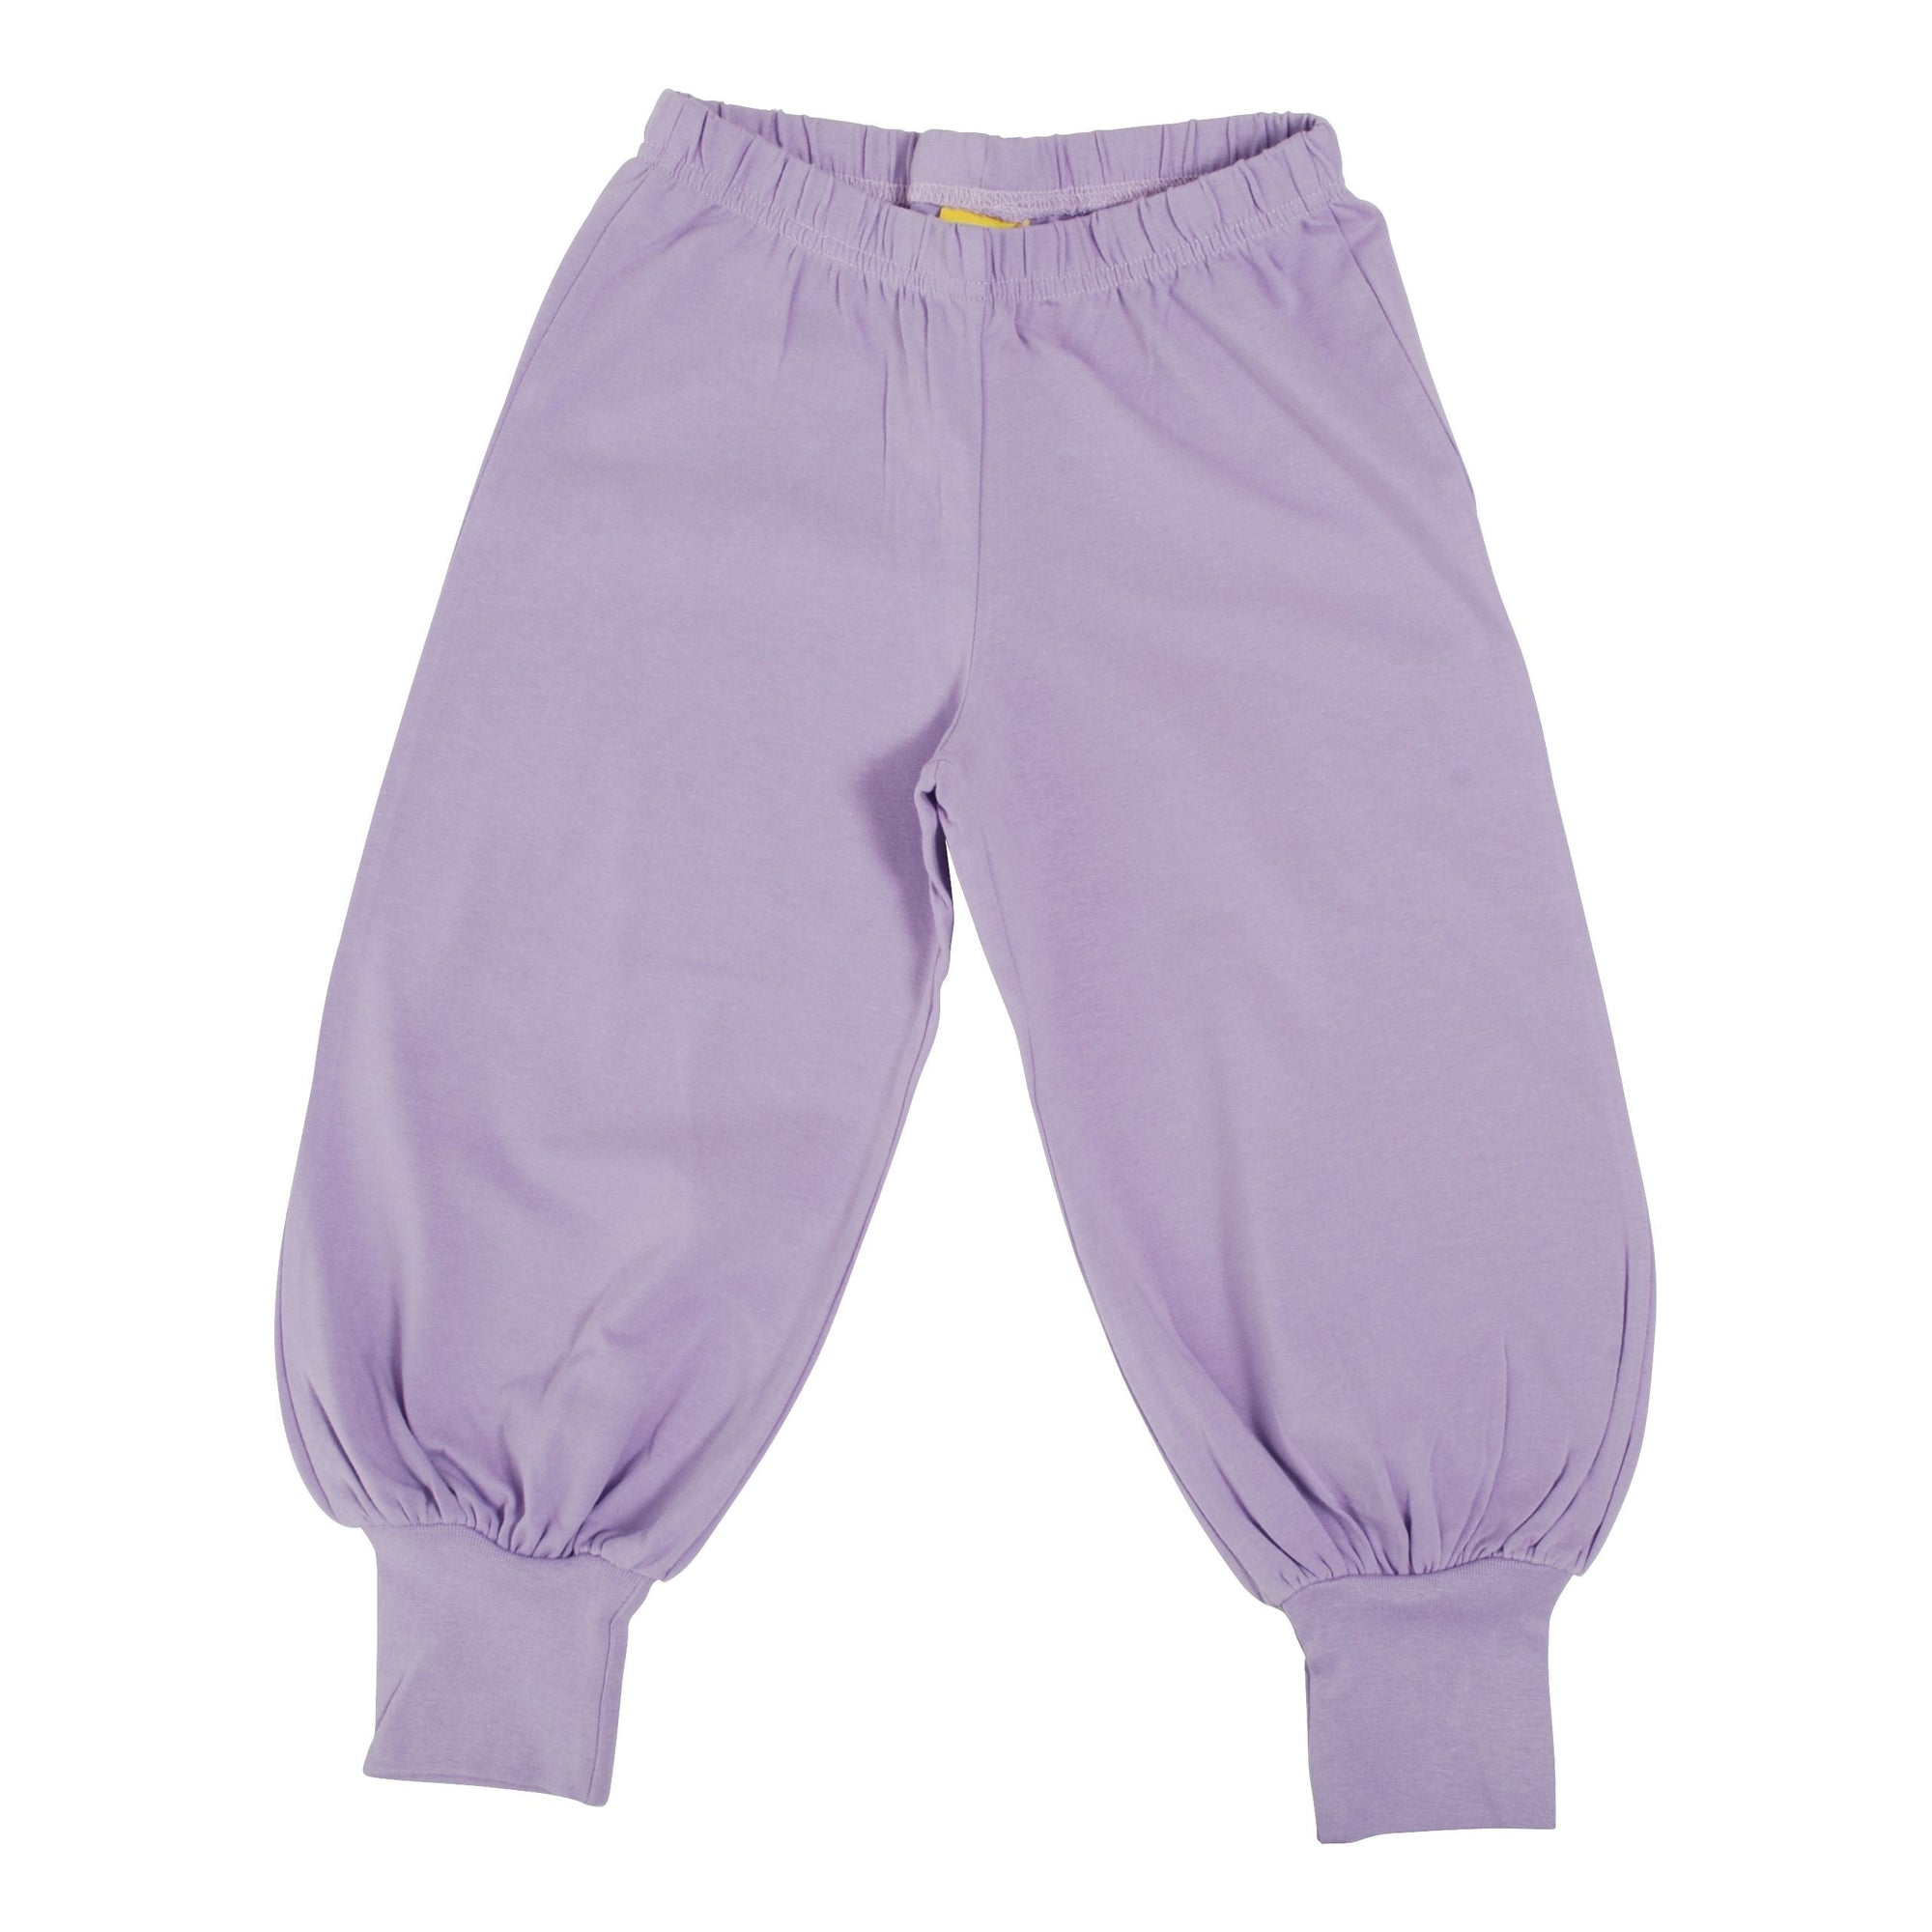 Viola Baggy Pants - 1 Left Size 12-14 years-More Than A Fling-Modern Rascals